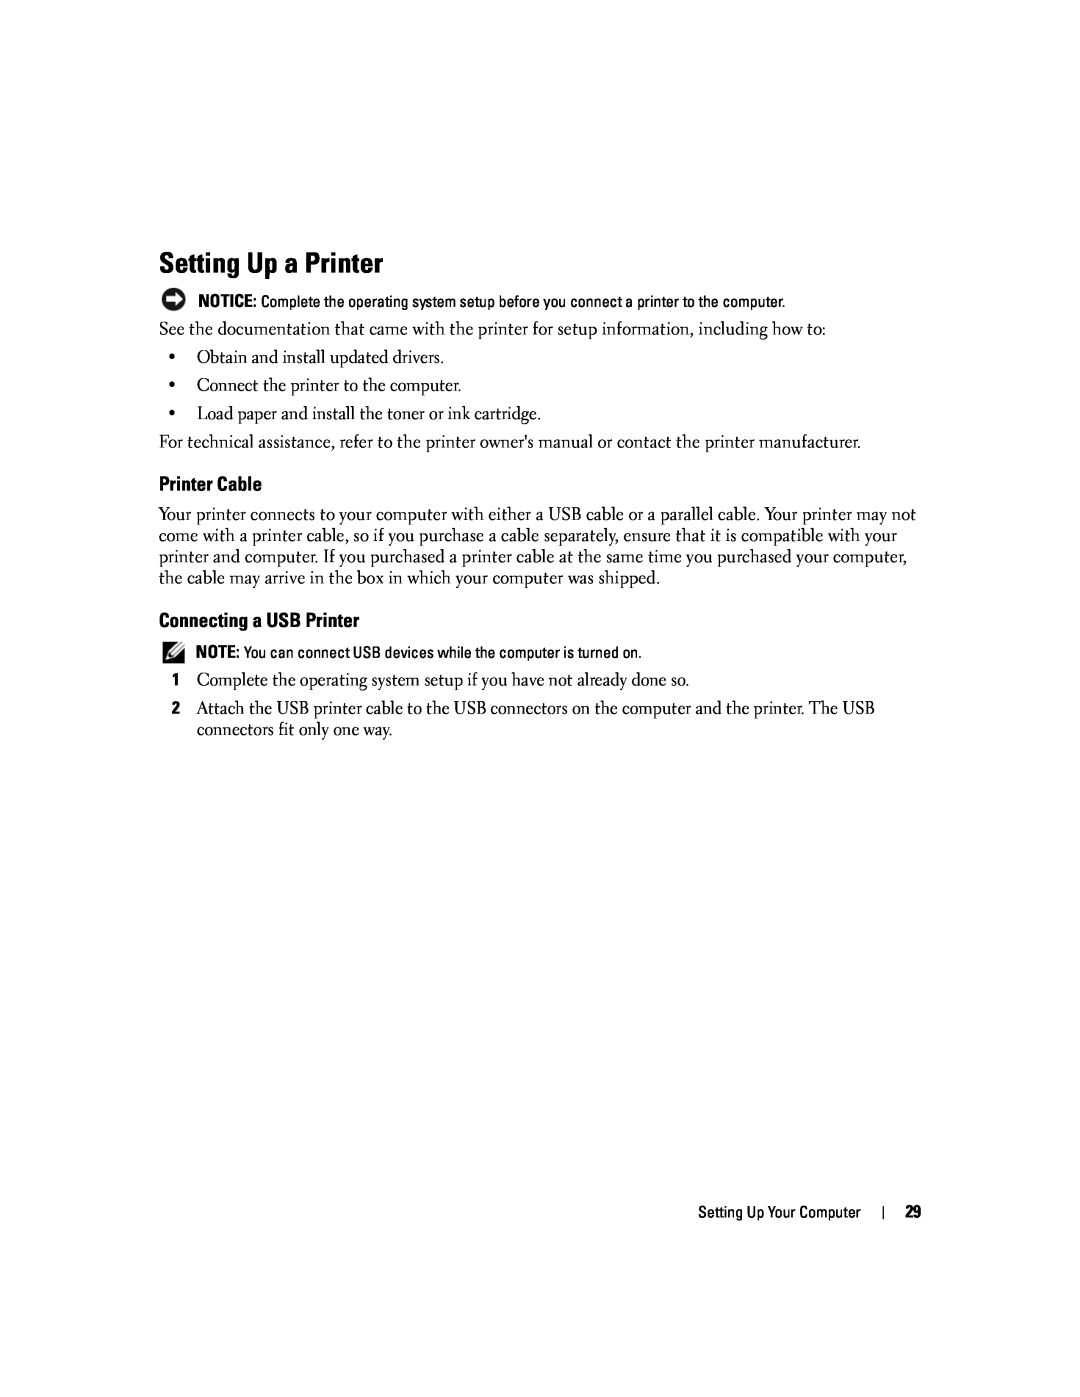 Dell 1501 owner manual Setting Up a Printer, Printer Cable, Connecting a USB Printer 